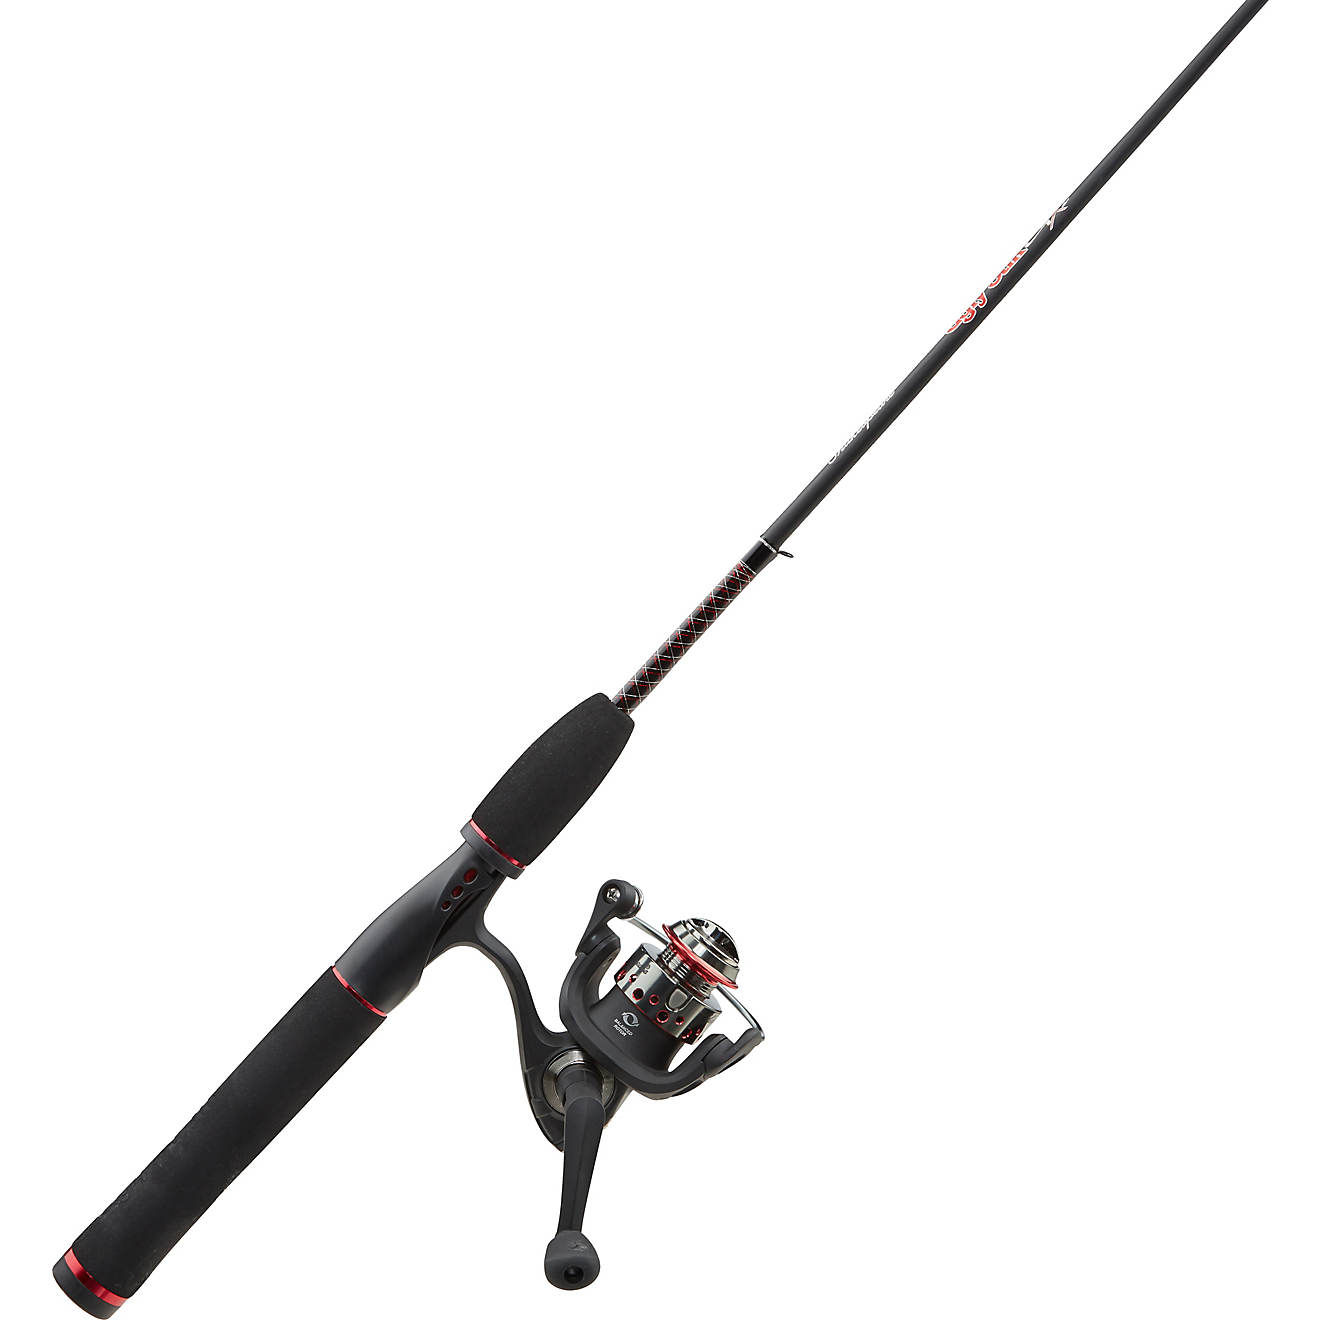 Ugly Stik GX2 4'8 UL Freshwater/Saltwater Spinning Rod and Reel Combo